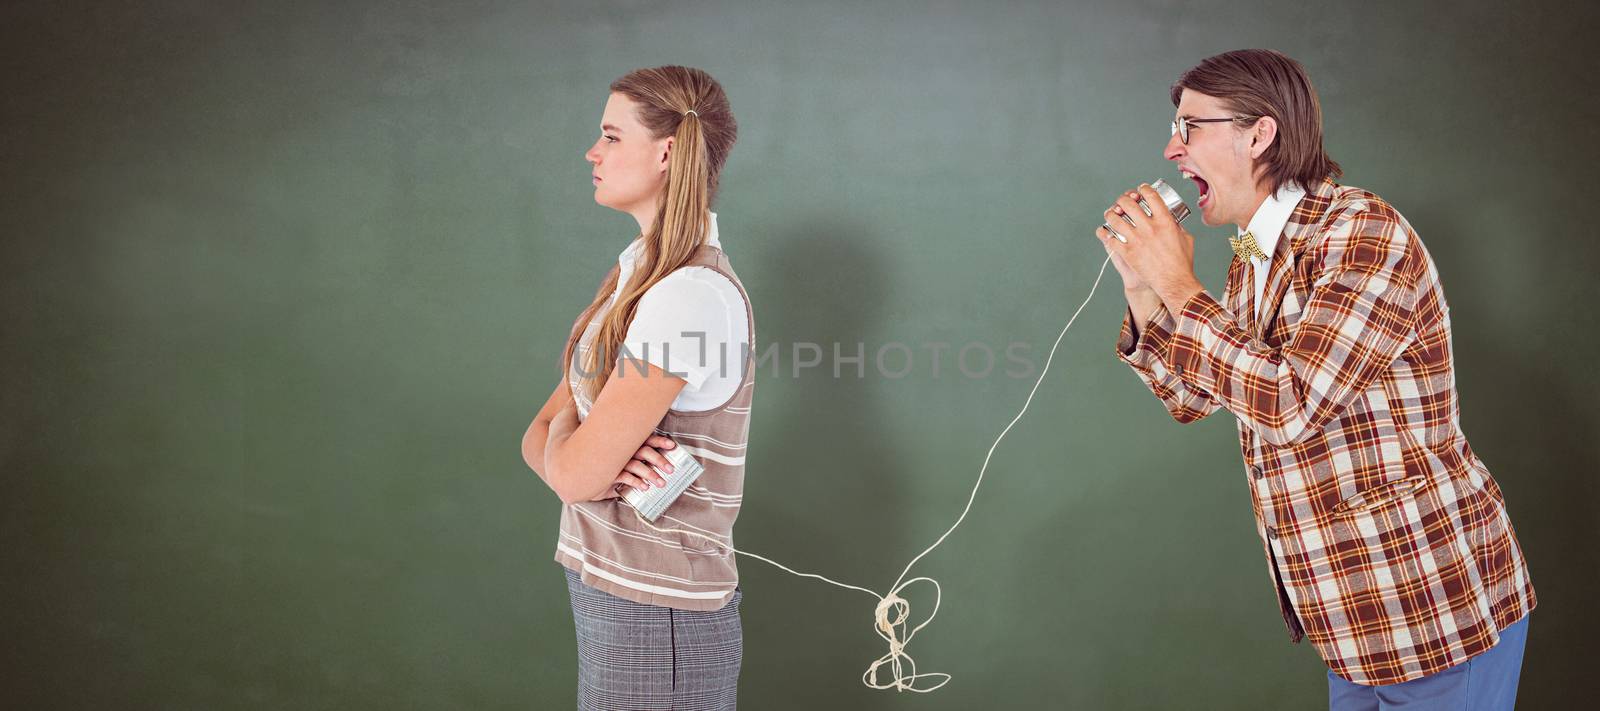 Geeky hipsters using string phone  against green chalkboard